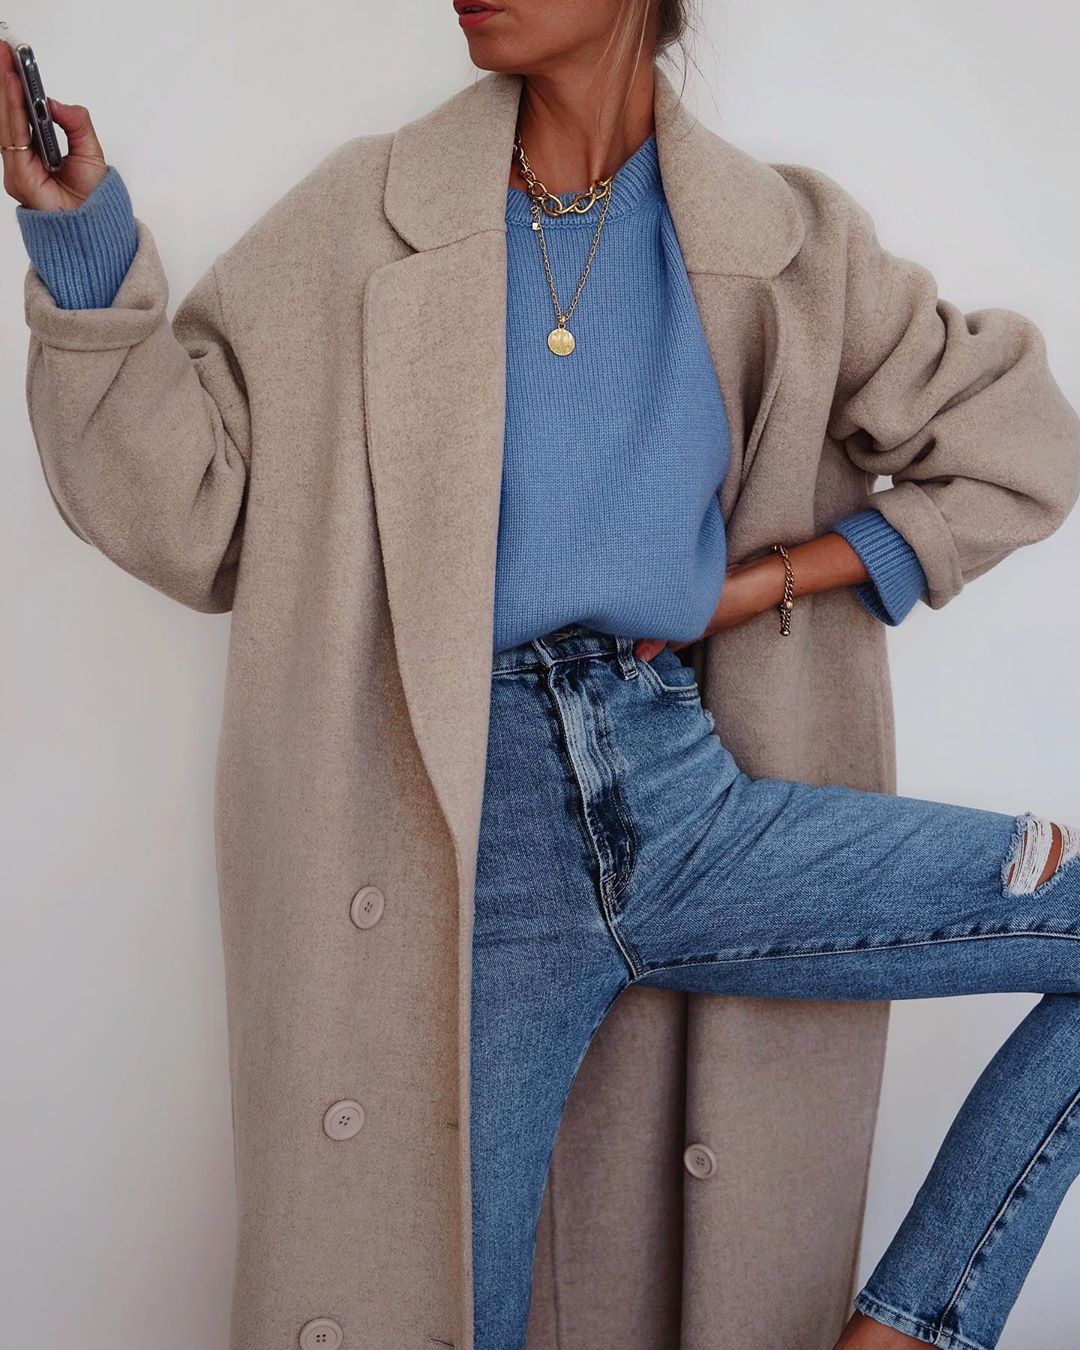 Here's How to Recreate This Casual-Cool Instagram Outfit